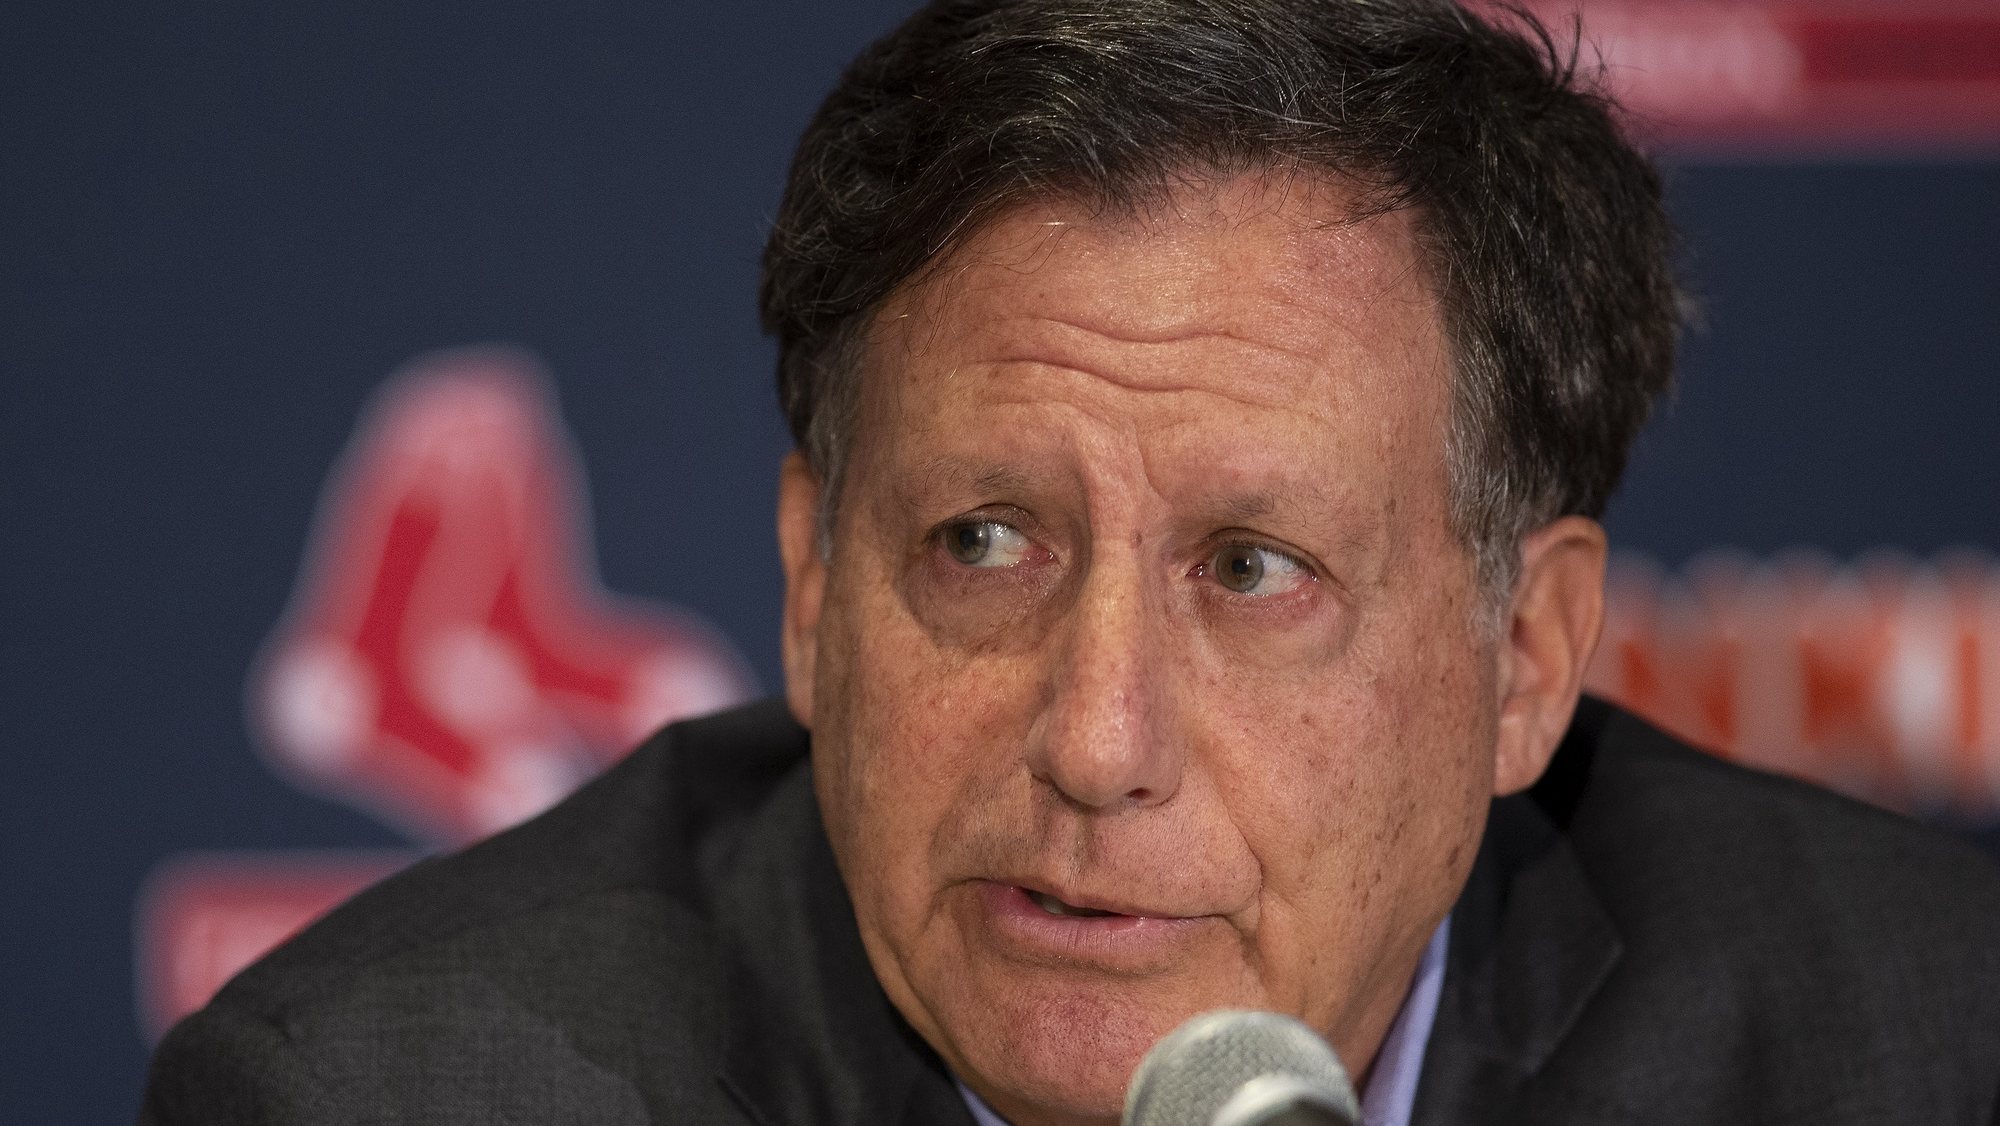 epa08131318 Boston Red Sox Chairman Tom Werner during a news conference regarding the sign stealing cheating scandal, at Fenway Park in Boston, Massachusetts, USA 15 January 2020.  EPA/CJ GUNTHER